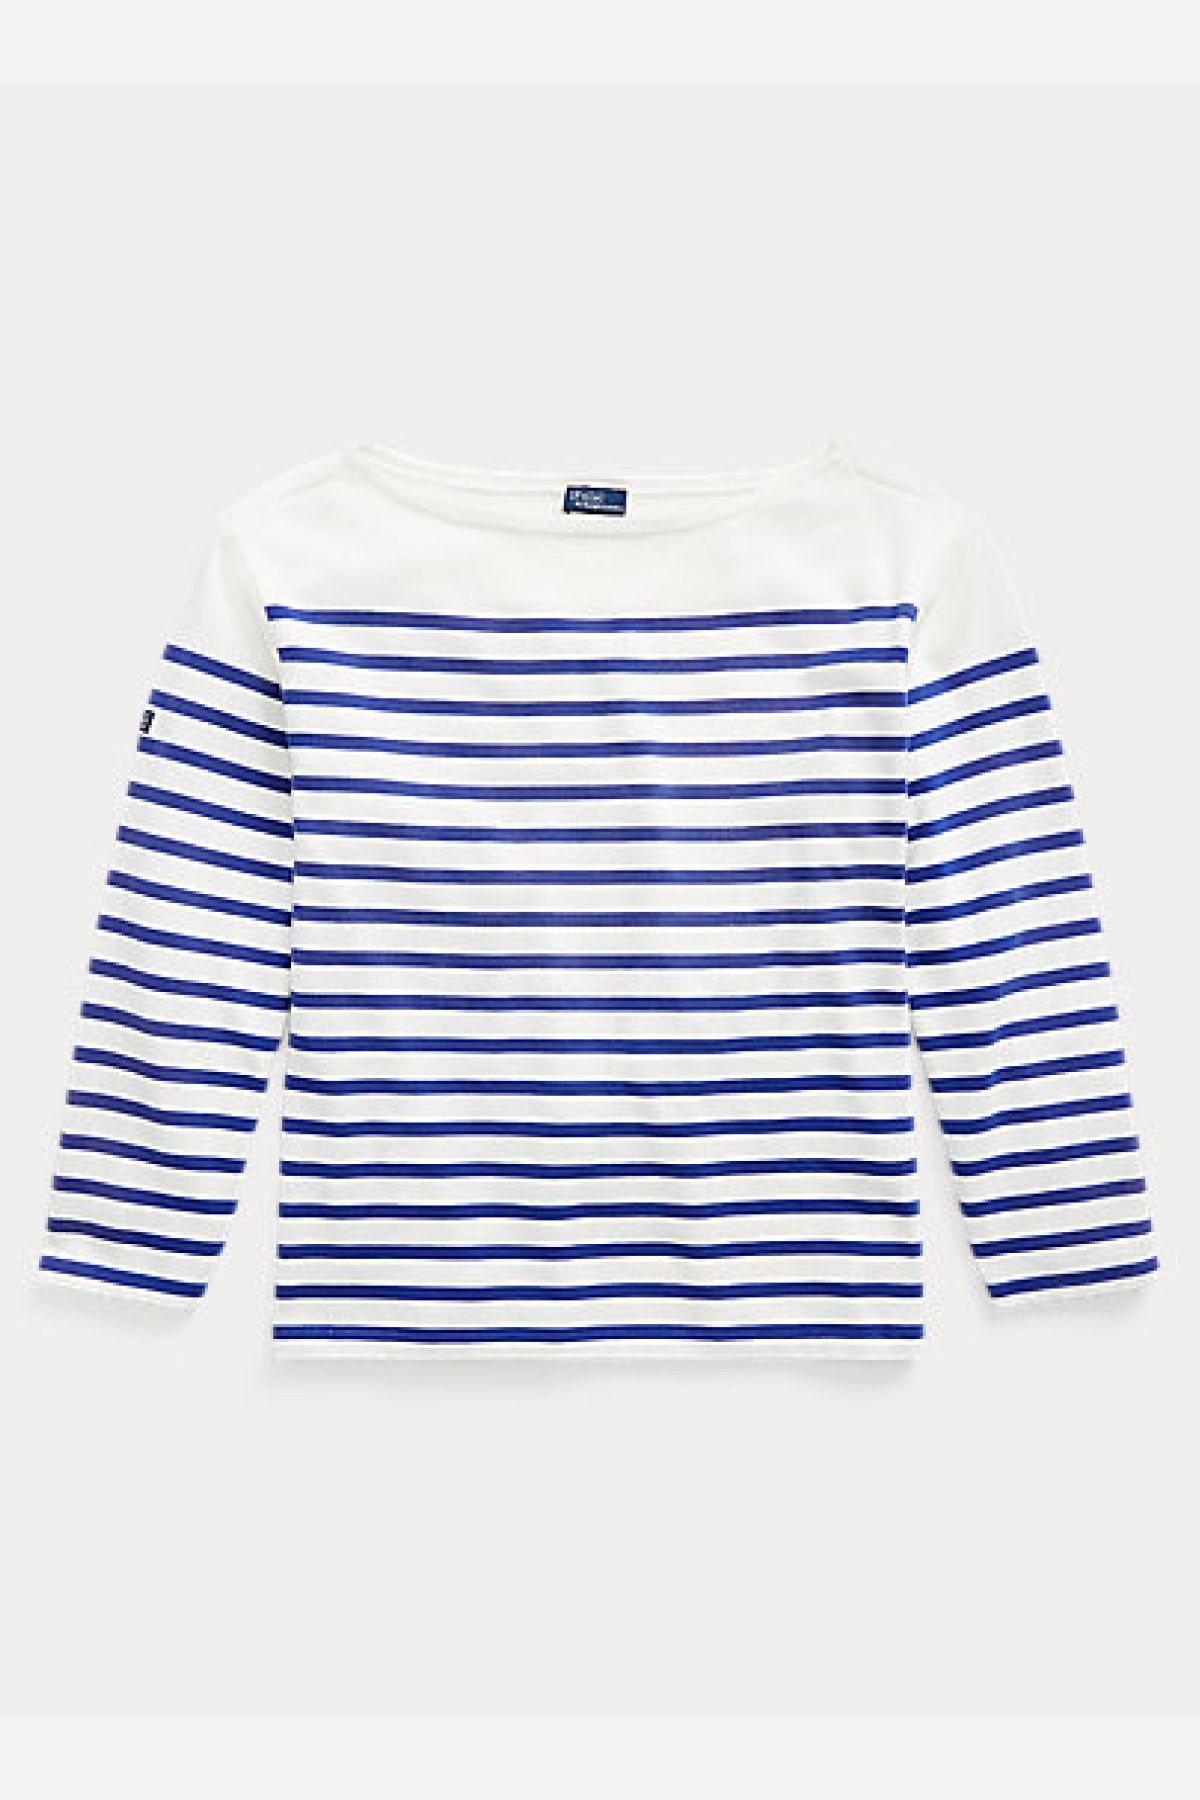 Best Breton Tops: Our 11 Favorite French-Style Striped Shirts for Women ...